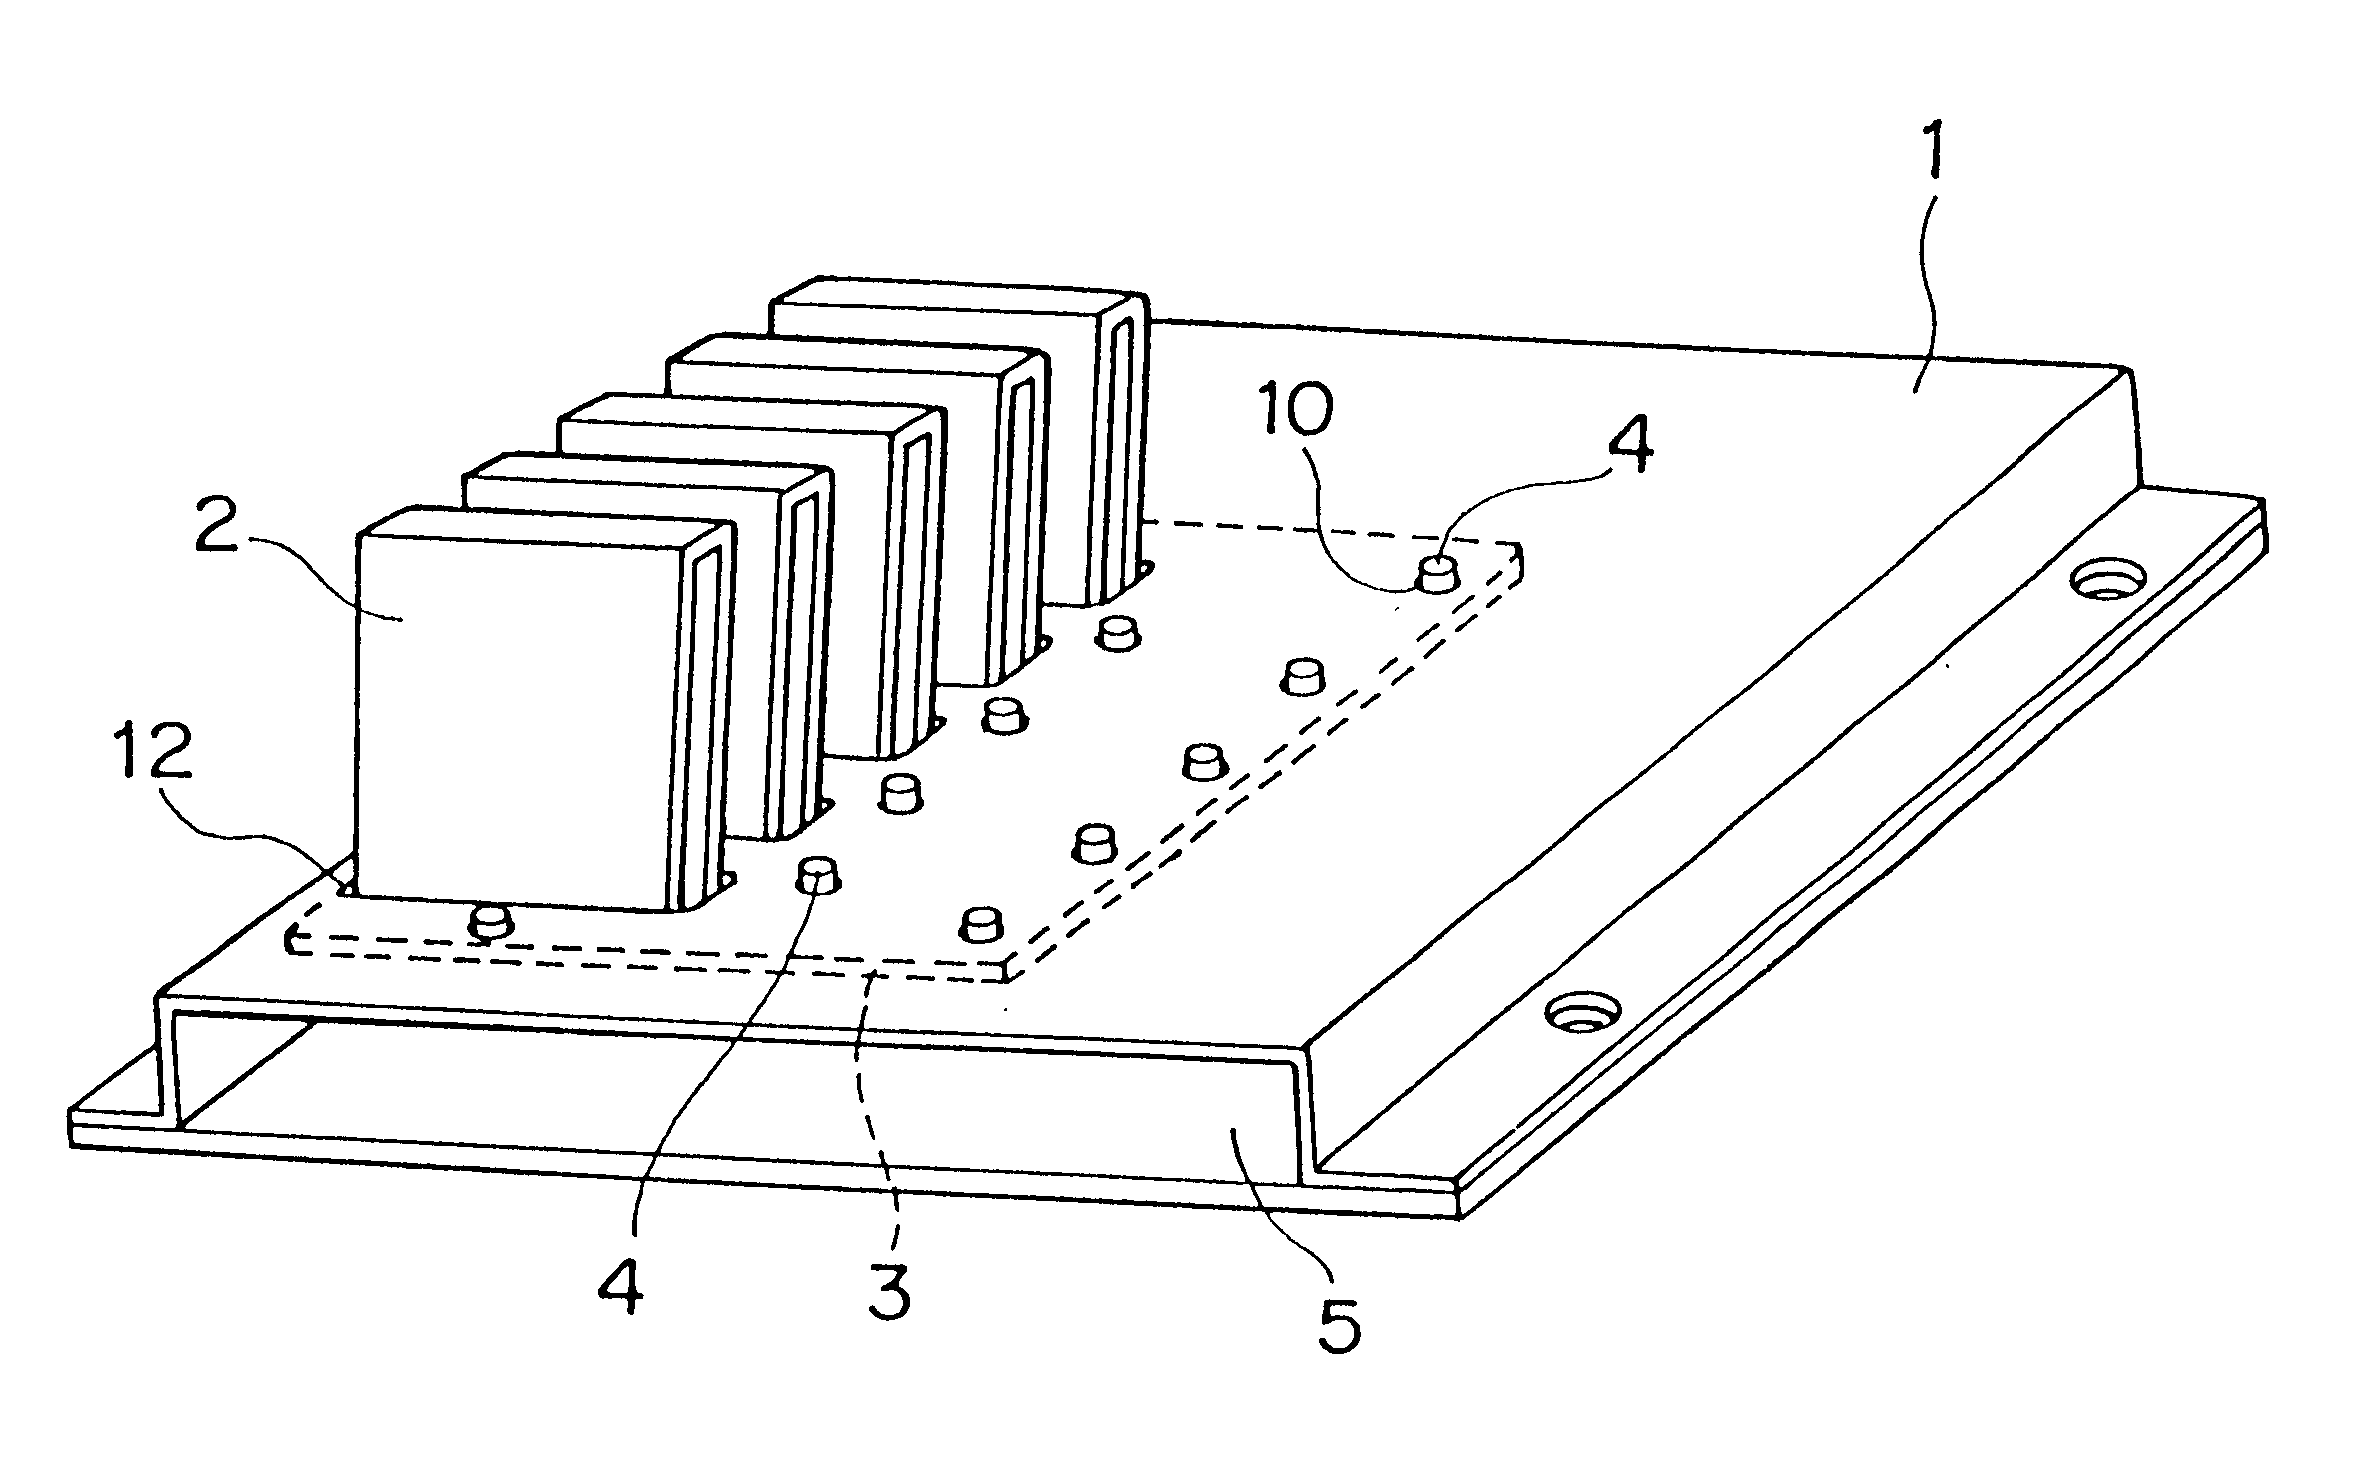 Heat sink including a heat dissipating fin and method for fixing the heat dissipating fin